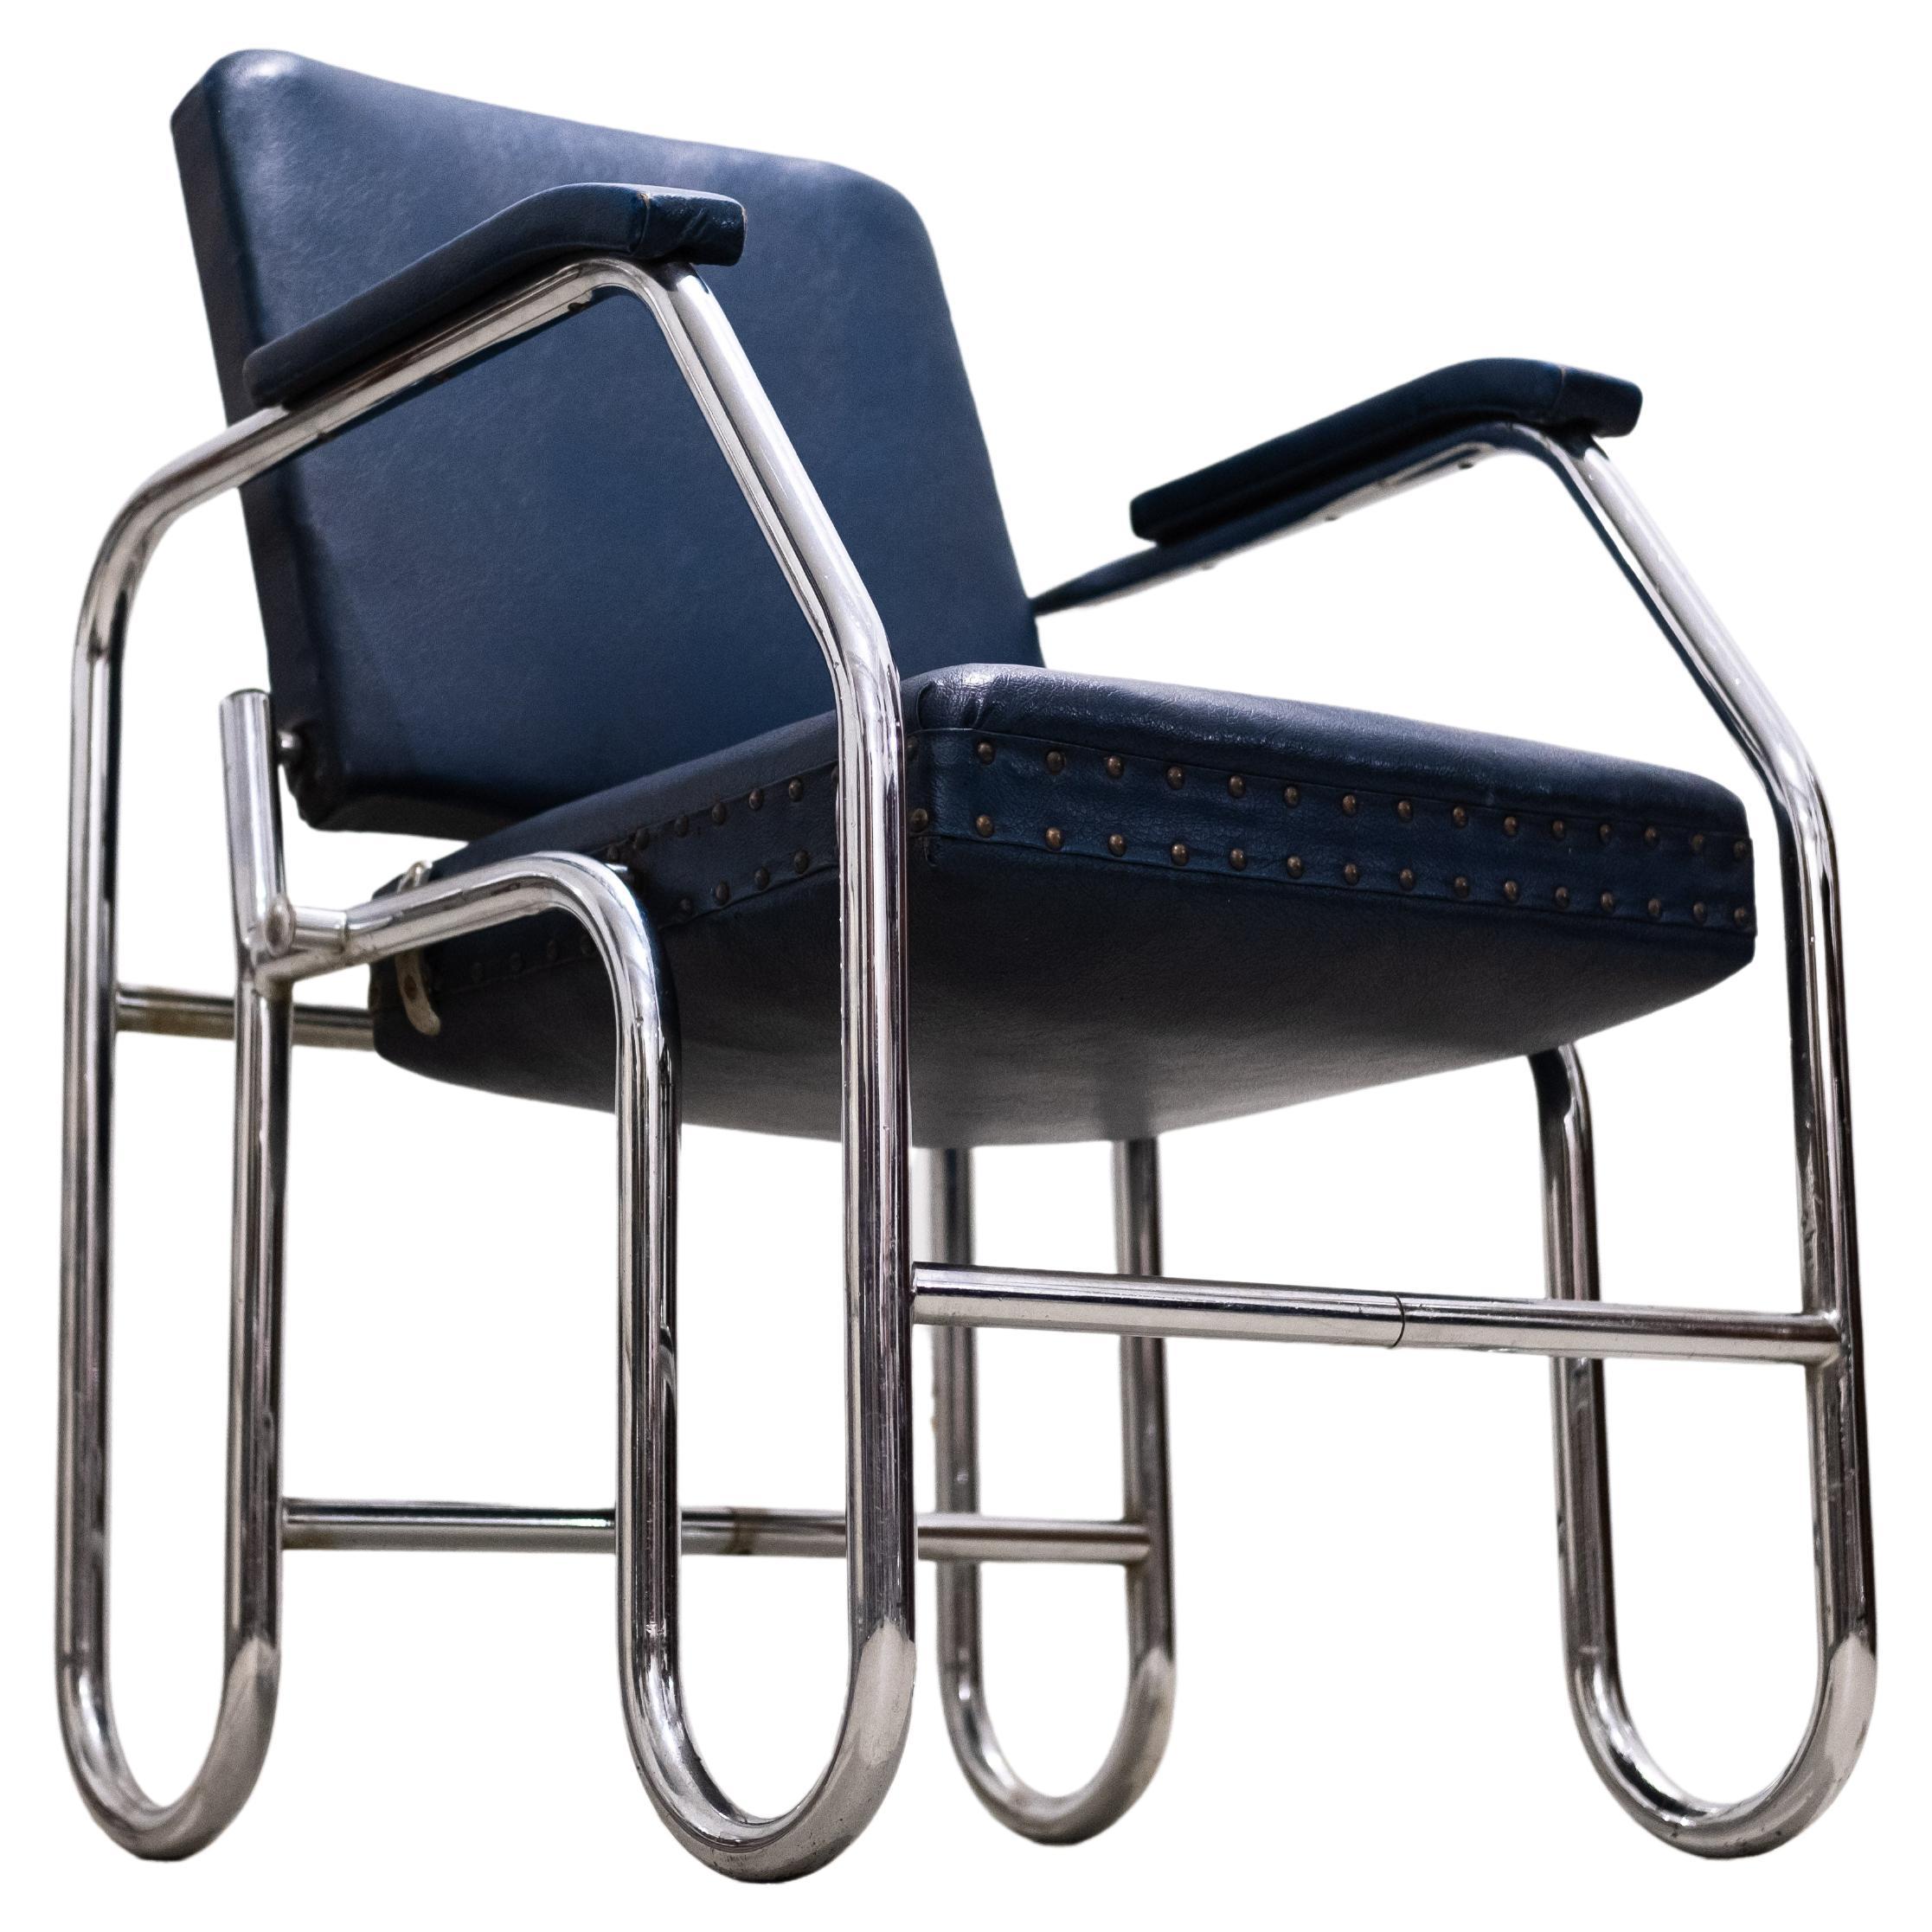 Blue Bauhaus Steelpipe Armchair with rotatable Seat (Amsterdam, 1930)